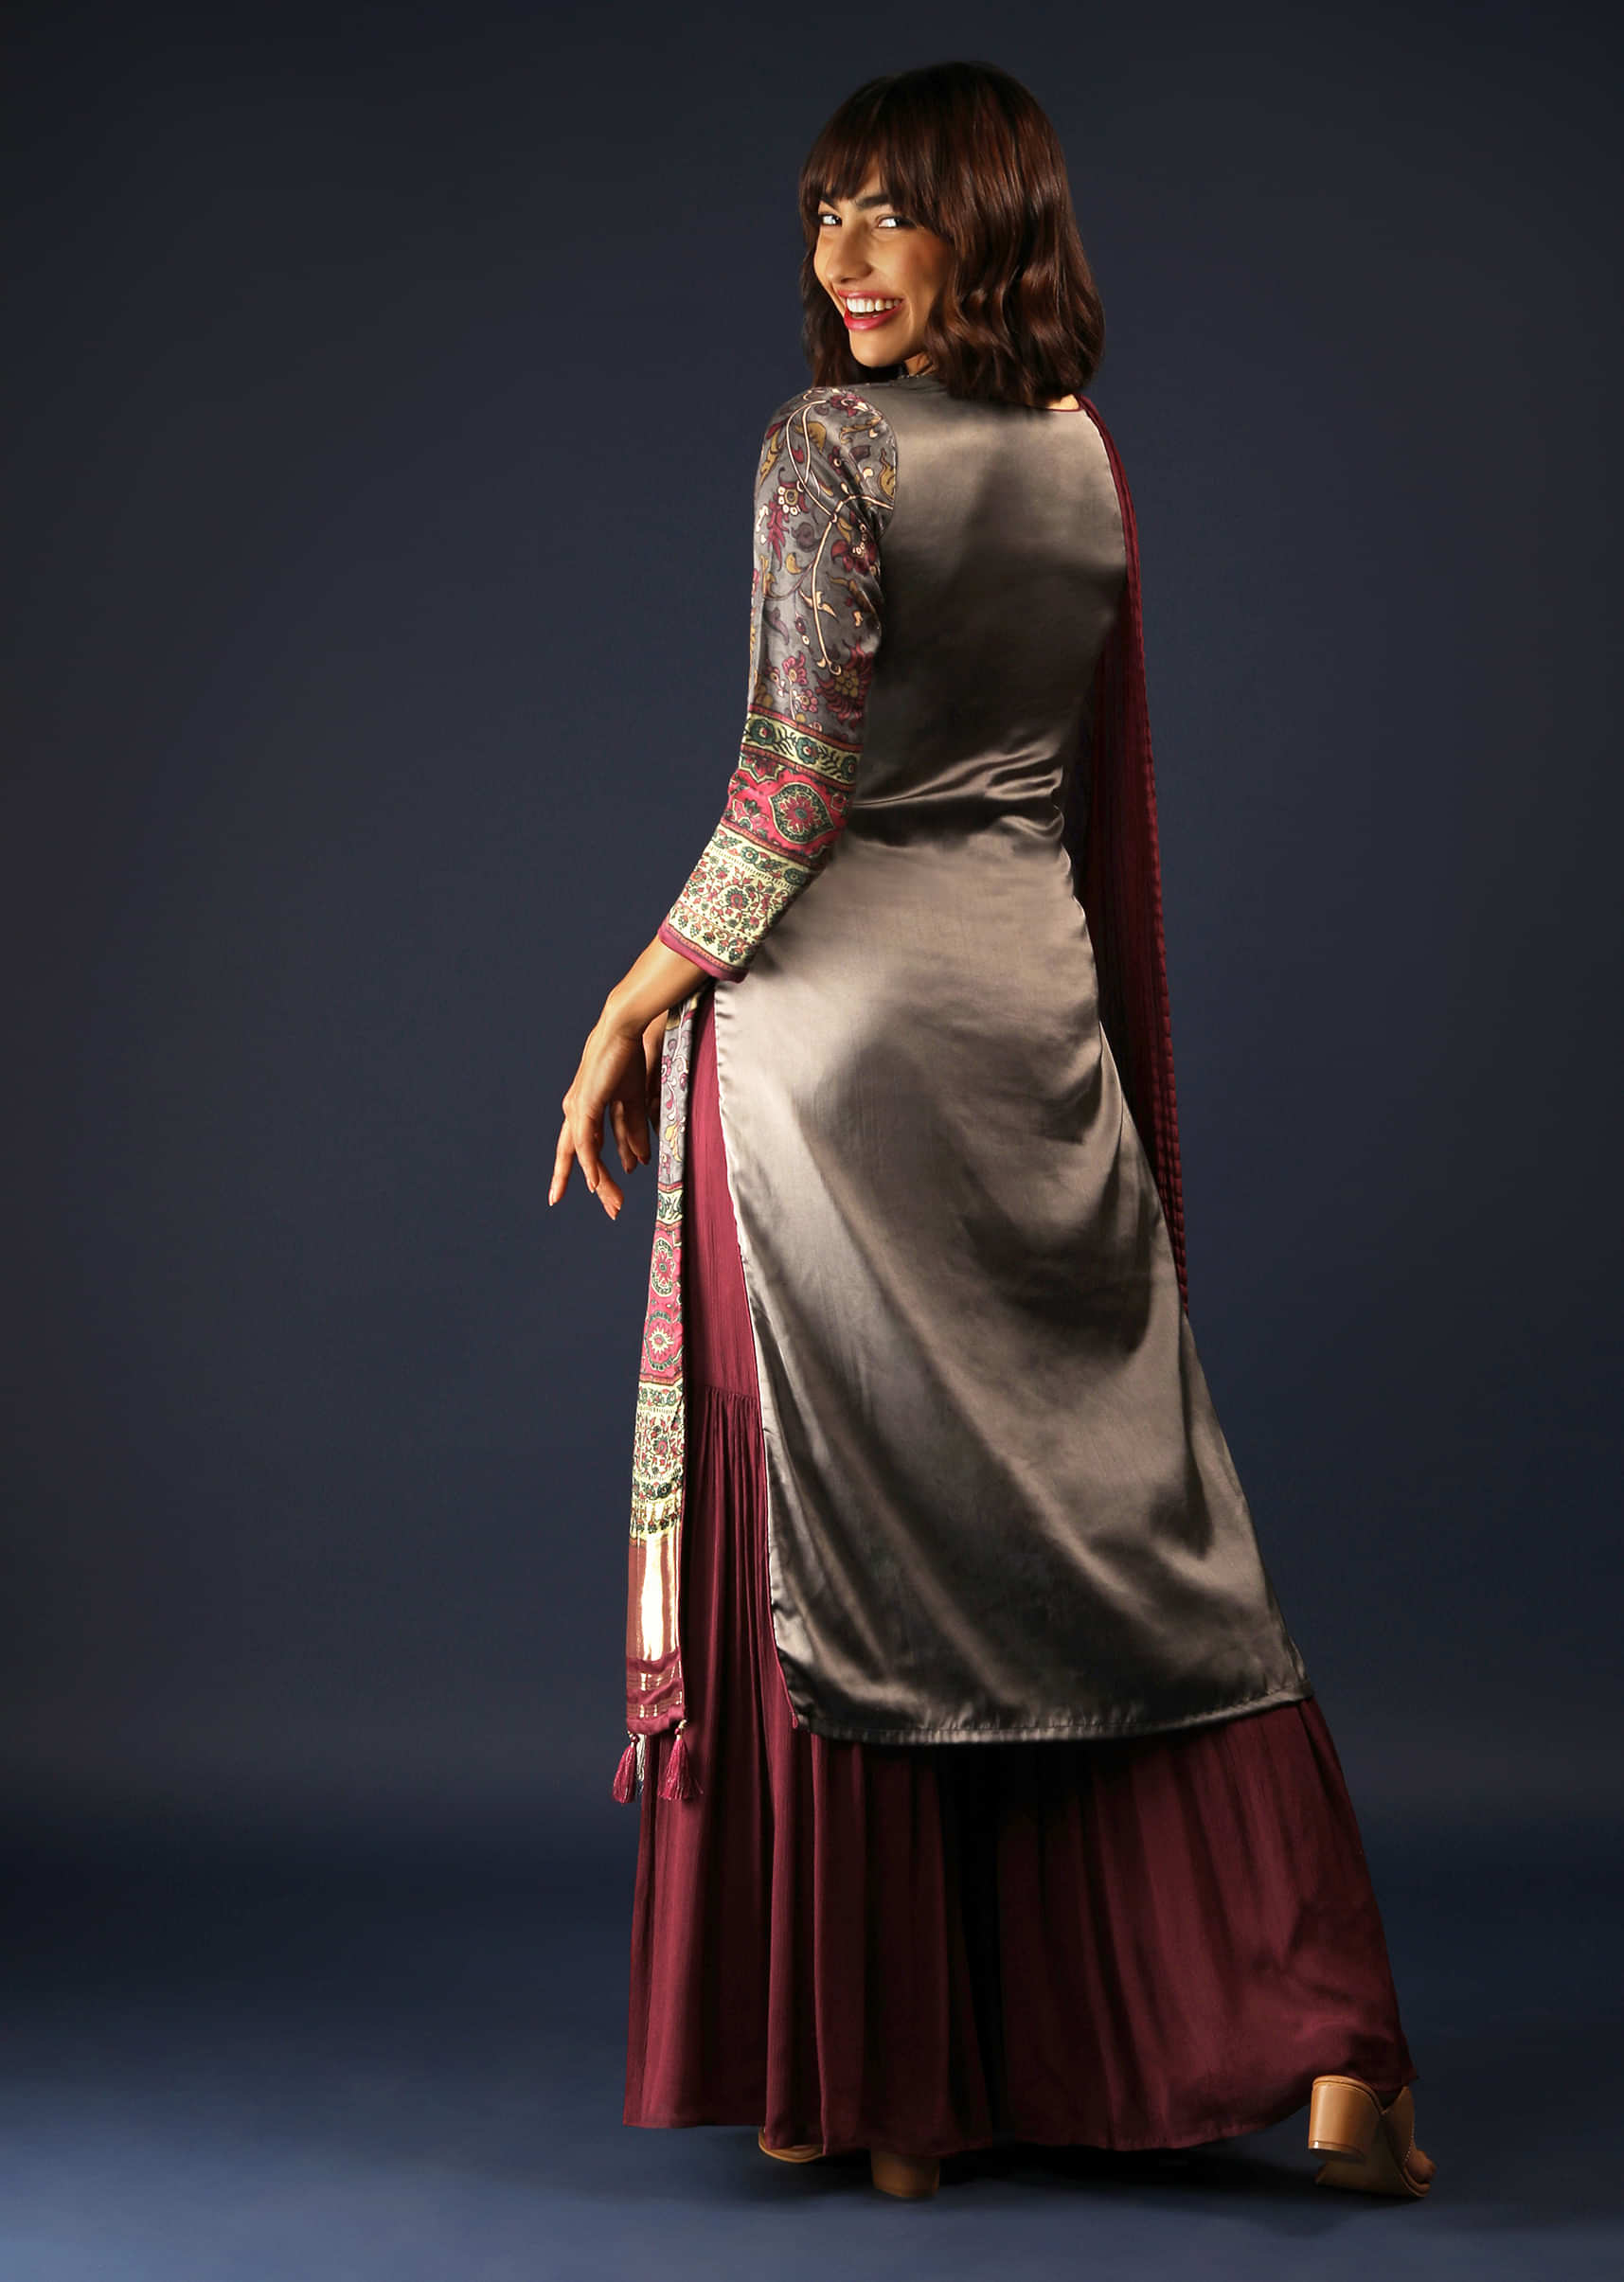 Stone Grey Sharara Suit In Satin With Floral Print And Zari Border 